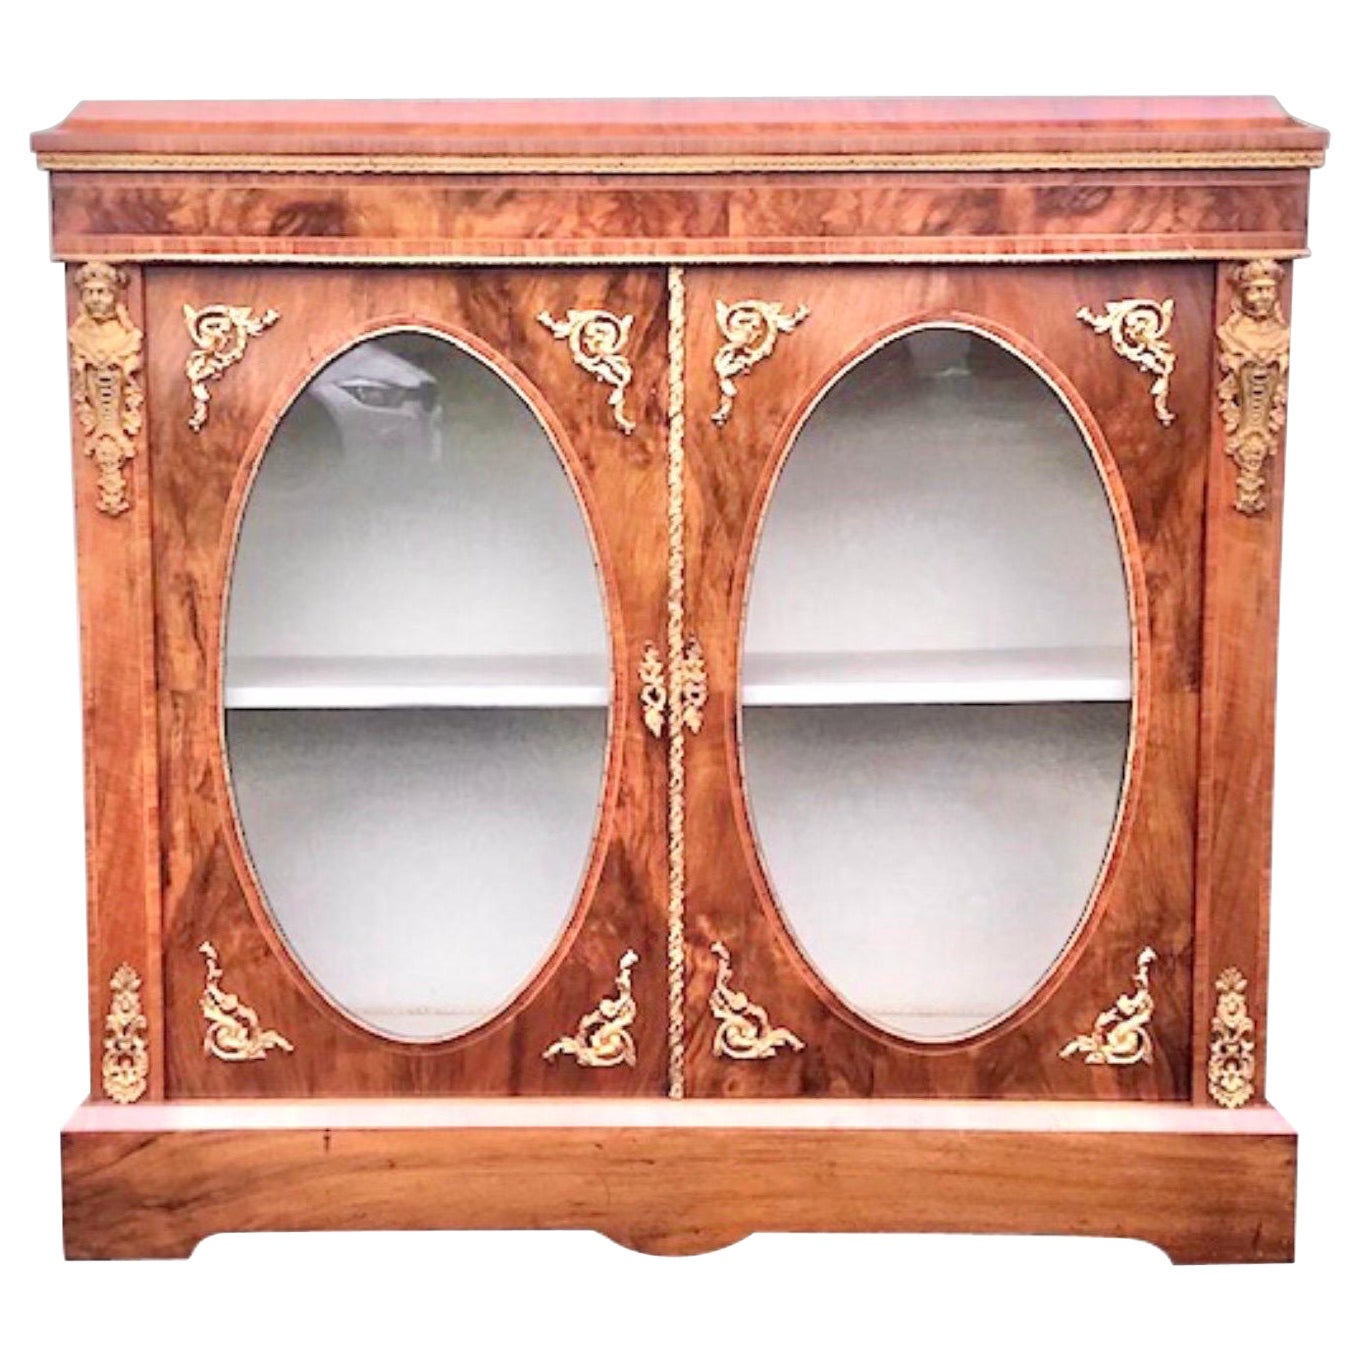 Figured Inlaid Walnut Ormolu Mounted Two Doored Antique Victorian Pier Cabinet For Sale